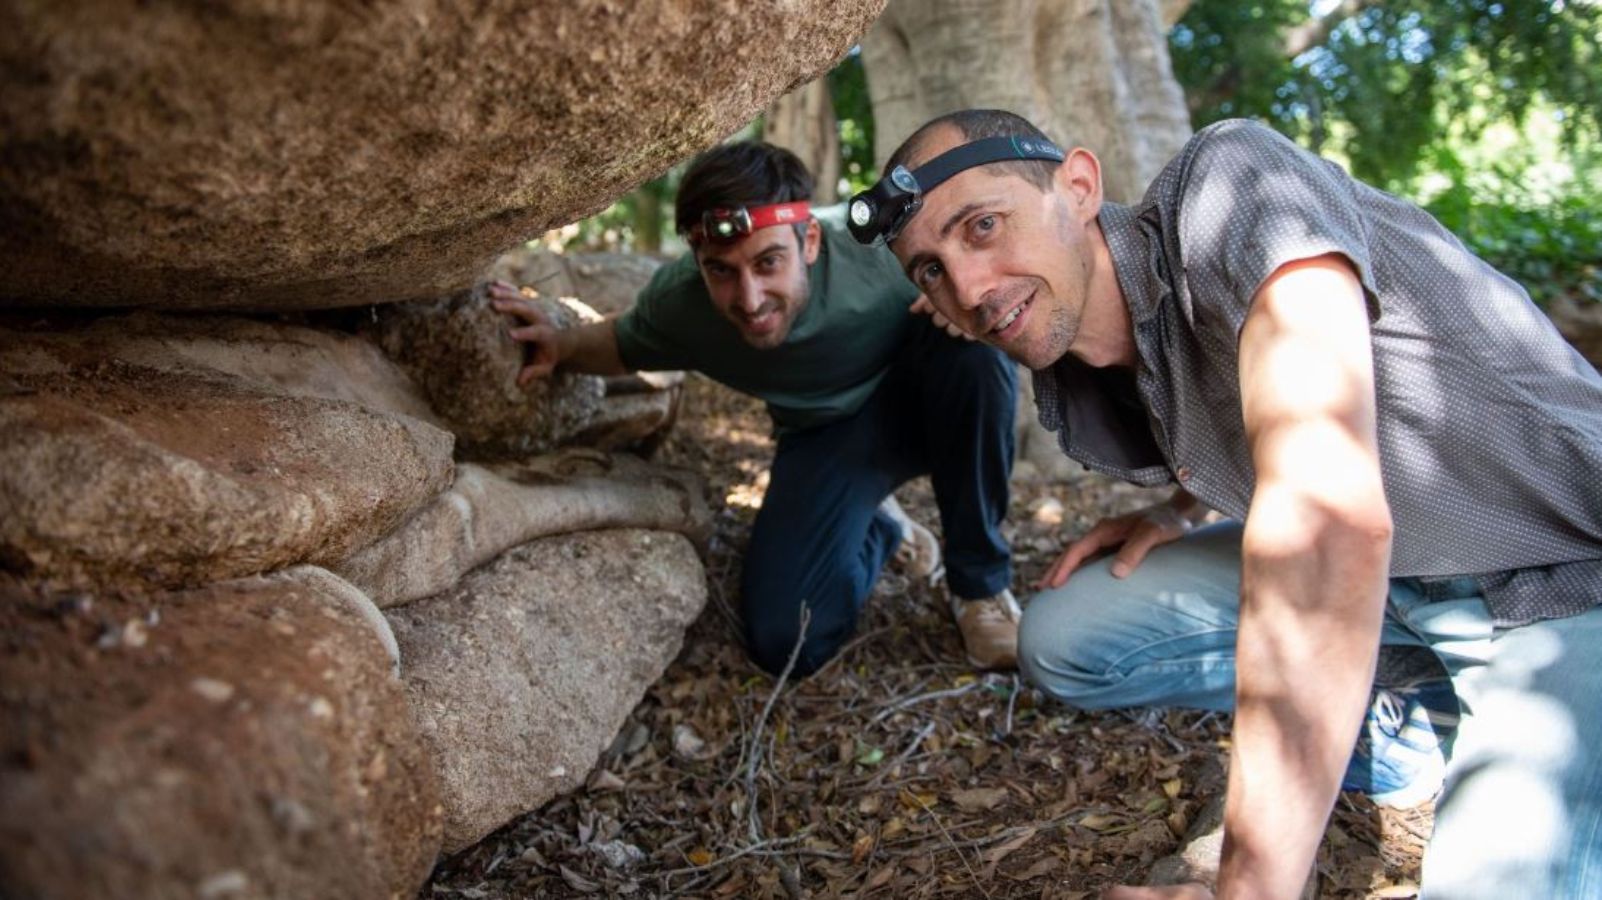 PhD candidate Ido Rog, left, and tree expert Dr. Tamir Klein dig deep for answers. Photo courtesy of Weizmann Institute of Science